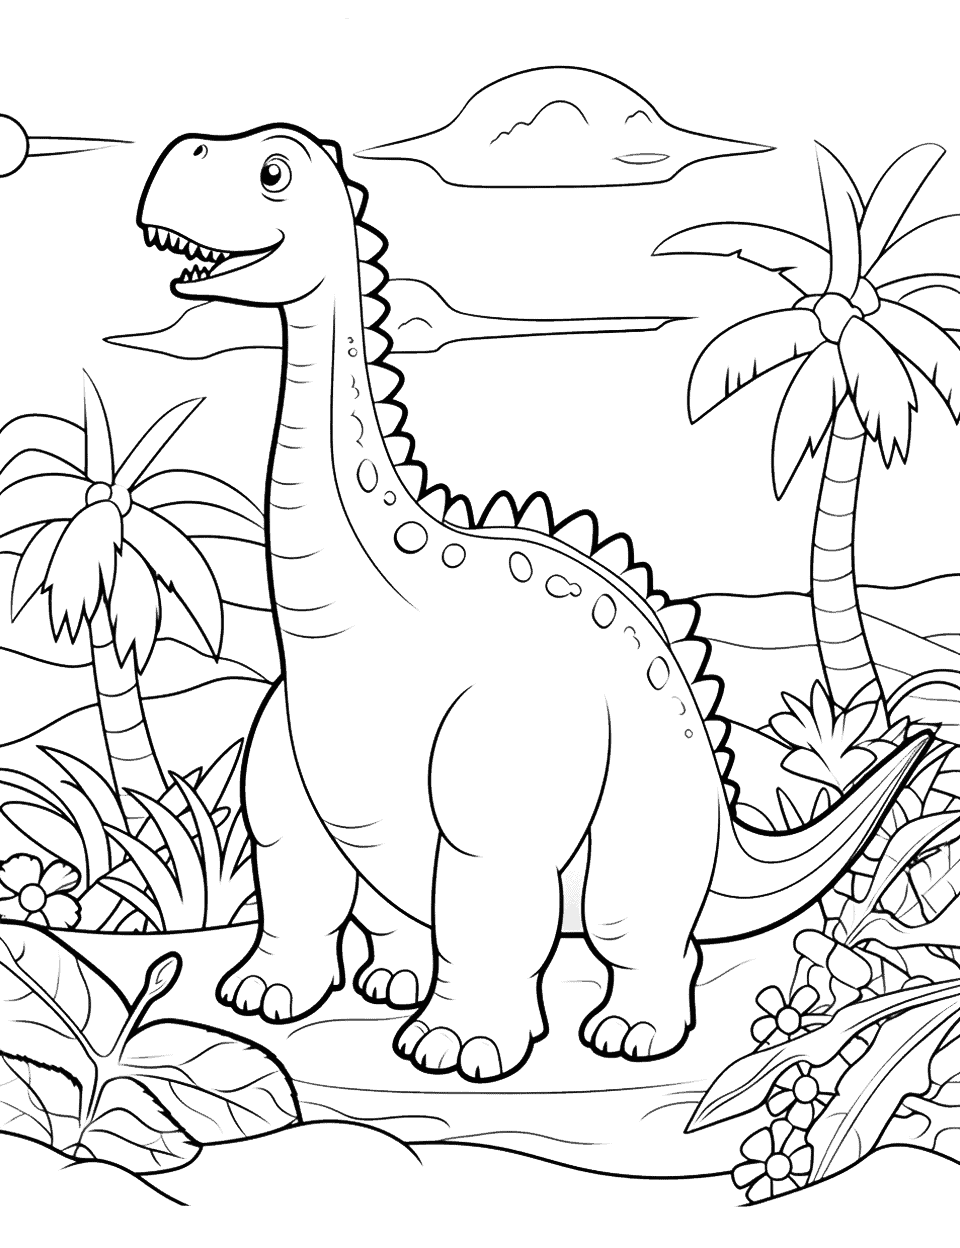 Easy Dinosaur Scene Coloring Page - A simple, easy to color scene with a friendly Brachiosaurus munching on leaves.